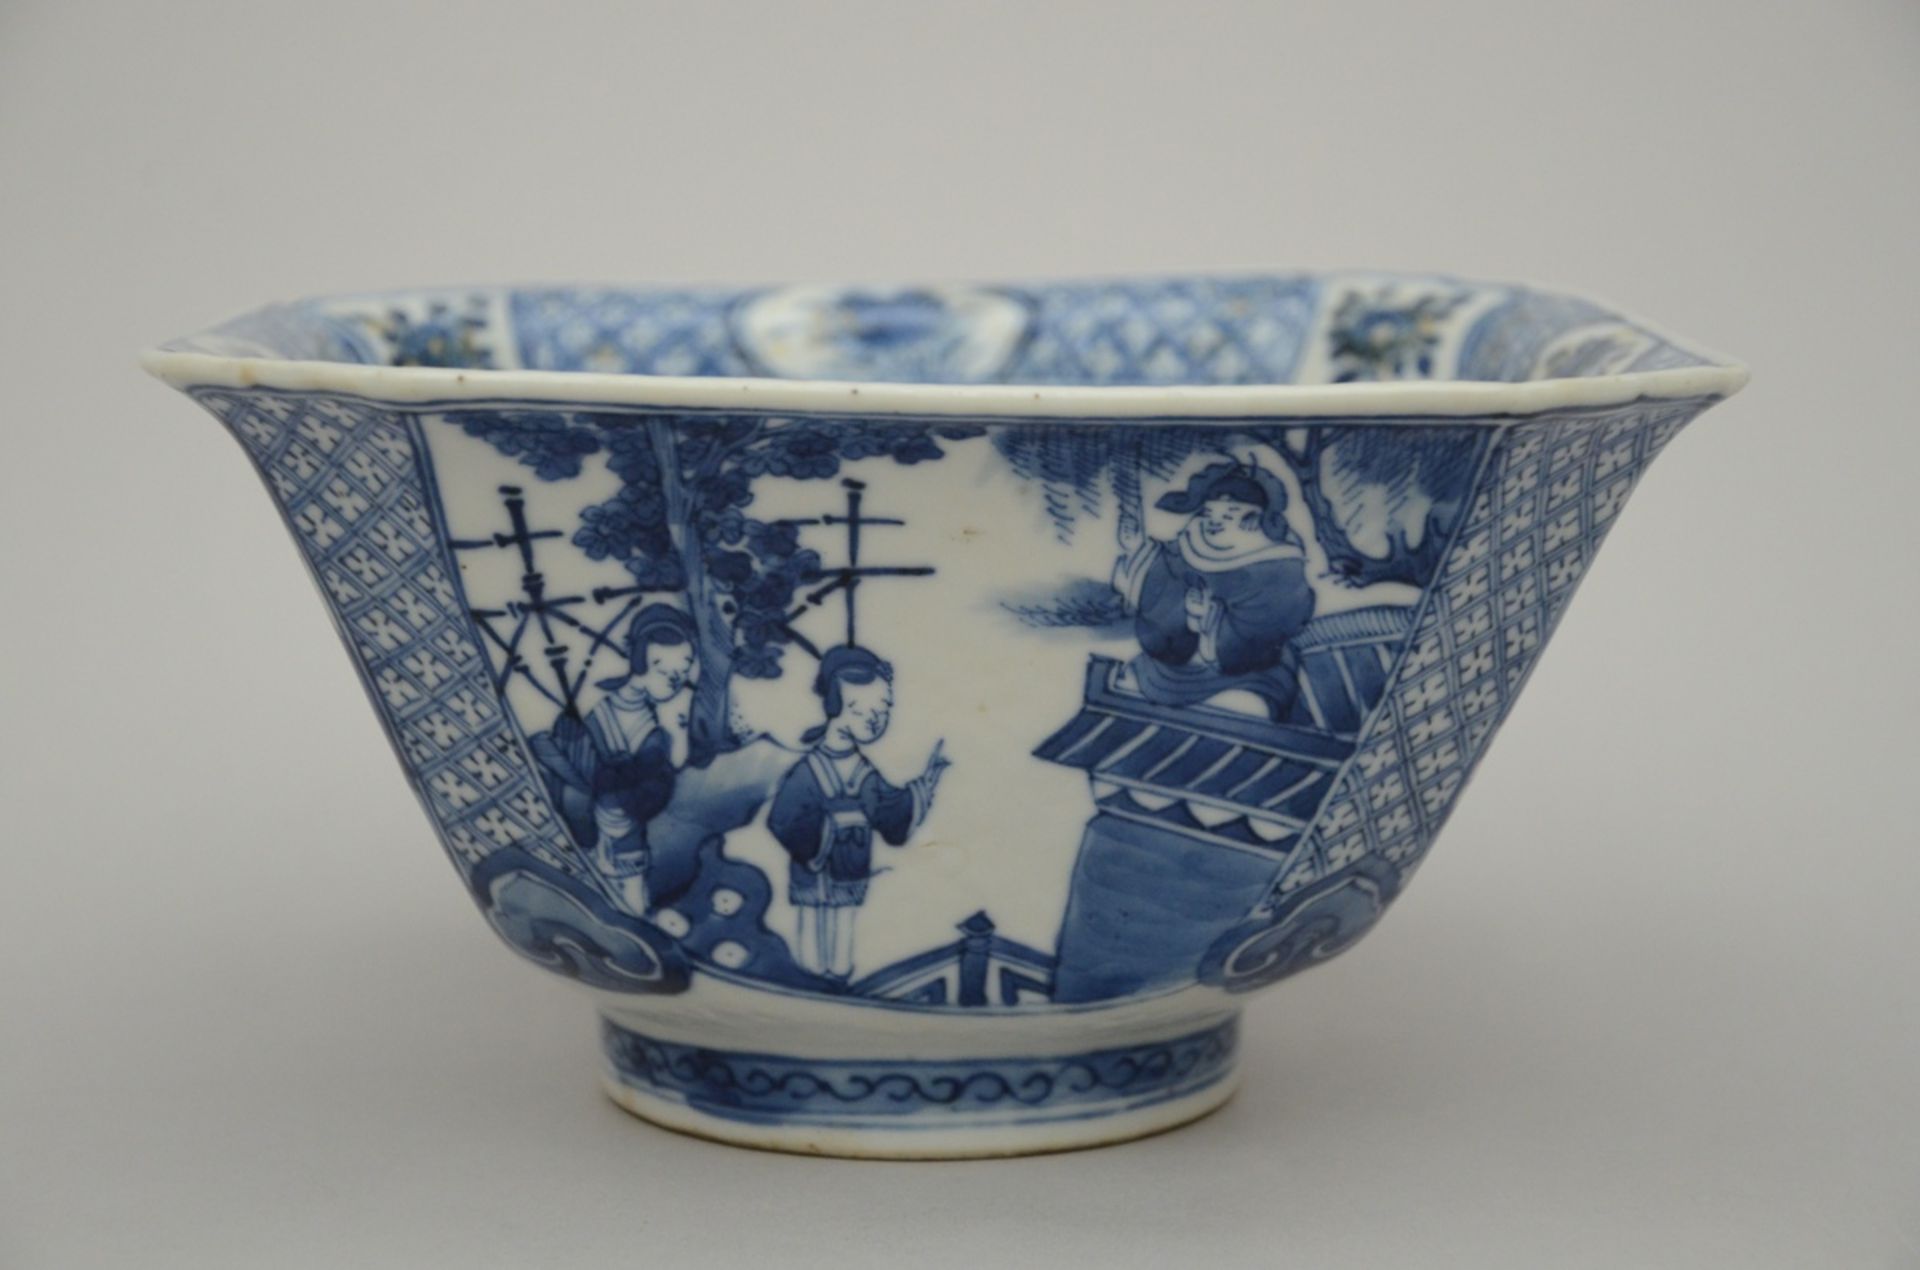 Chinese octagonal bowl in blue and white porcelain 'romantic scenes' 19th century (11.5x21x20.5cm) - Image 3 of 5